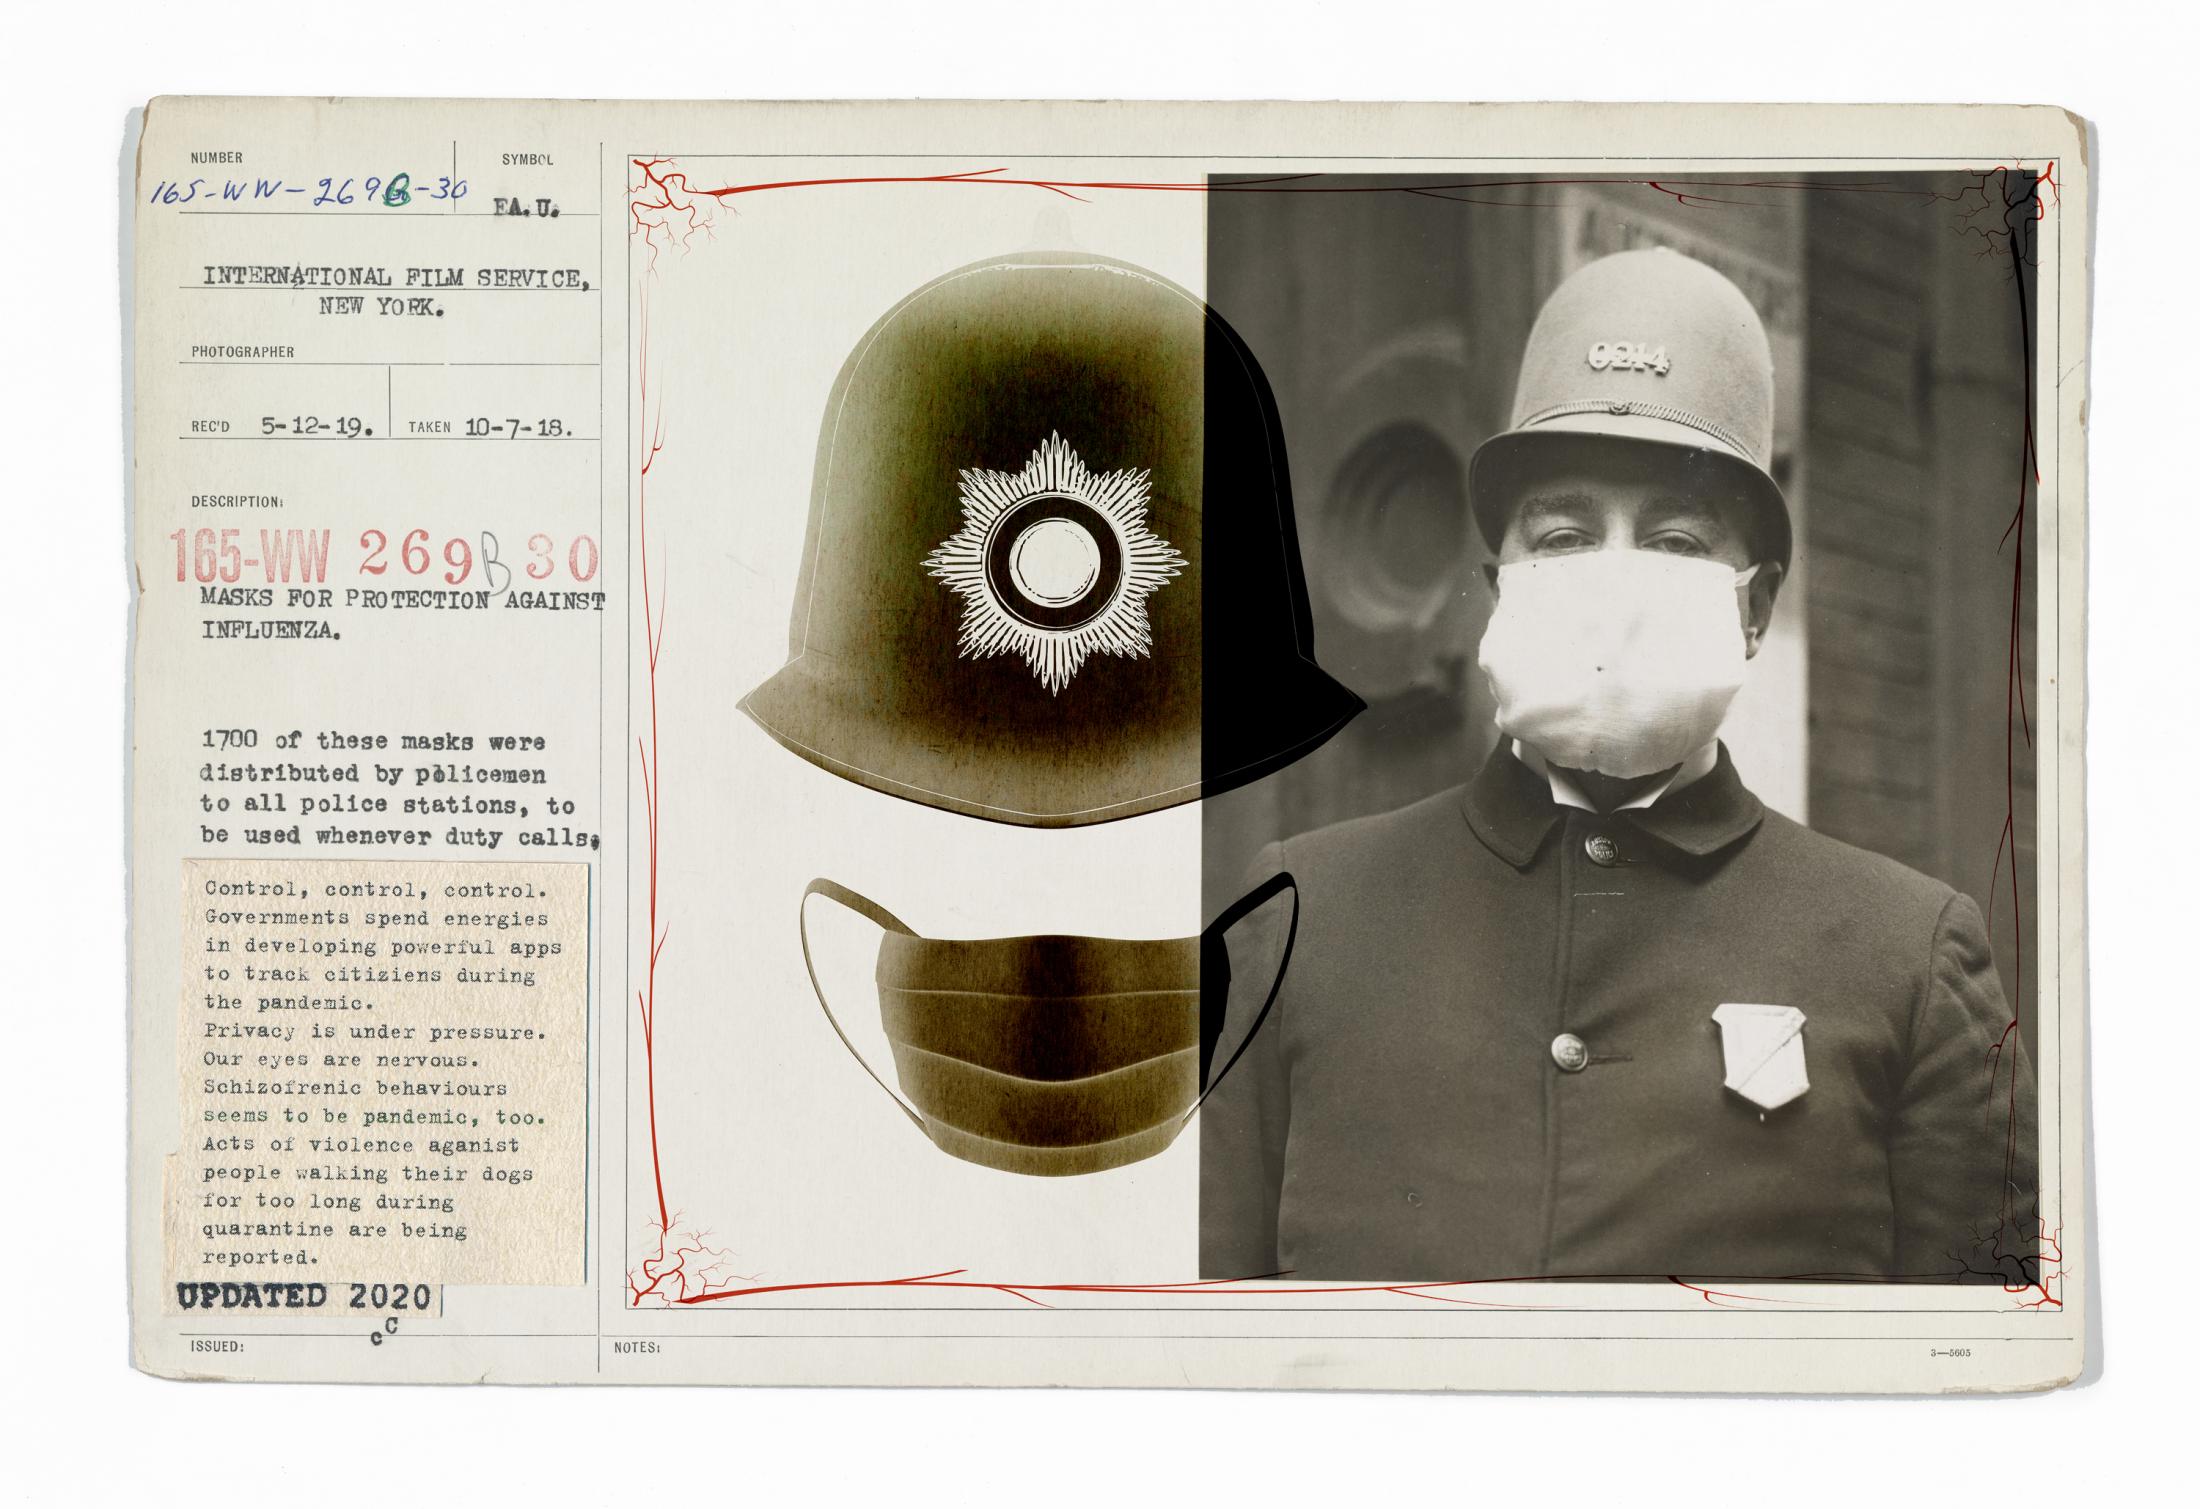 The Pandemic Papers - We have received mysterious postcards, addressed to the...